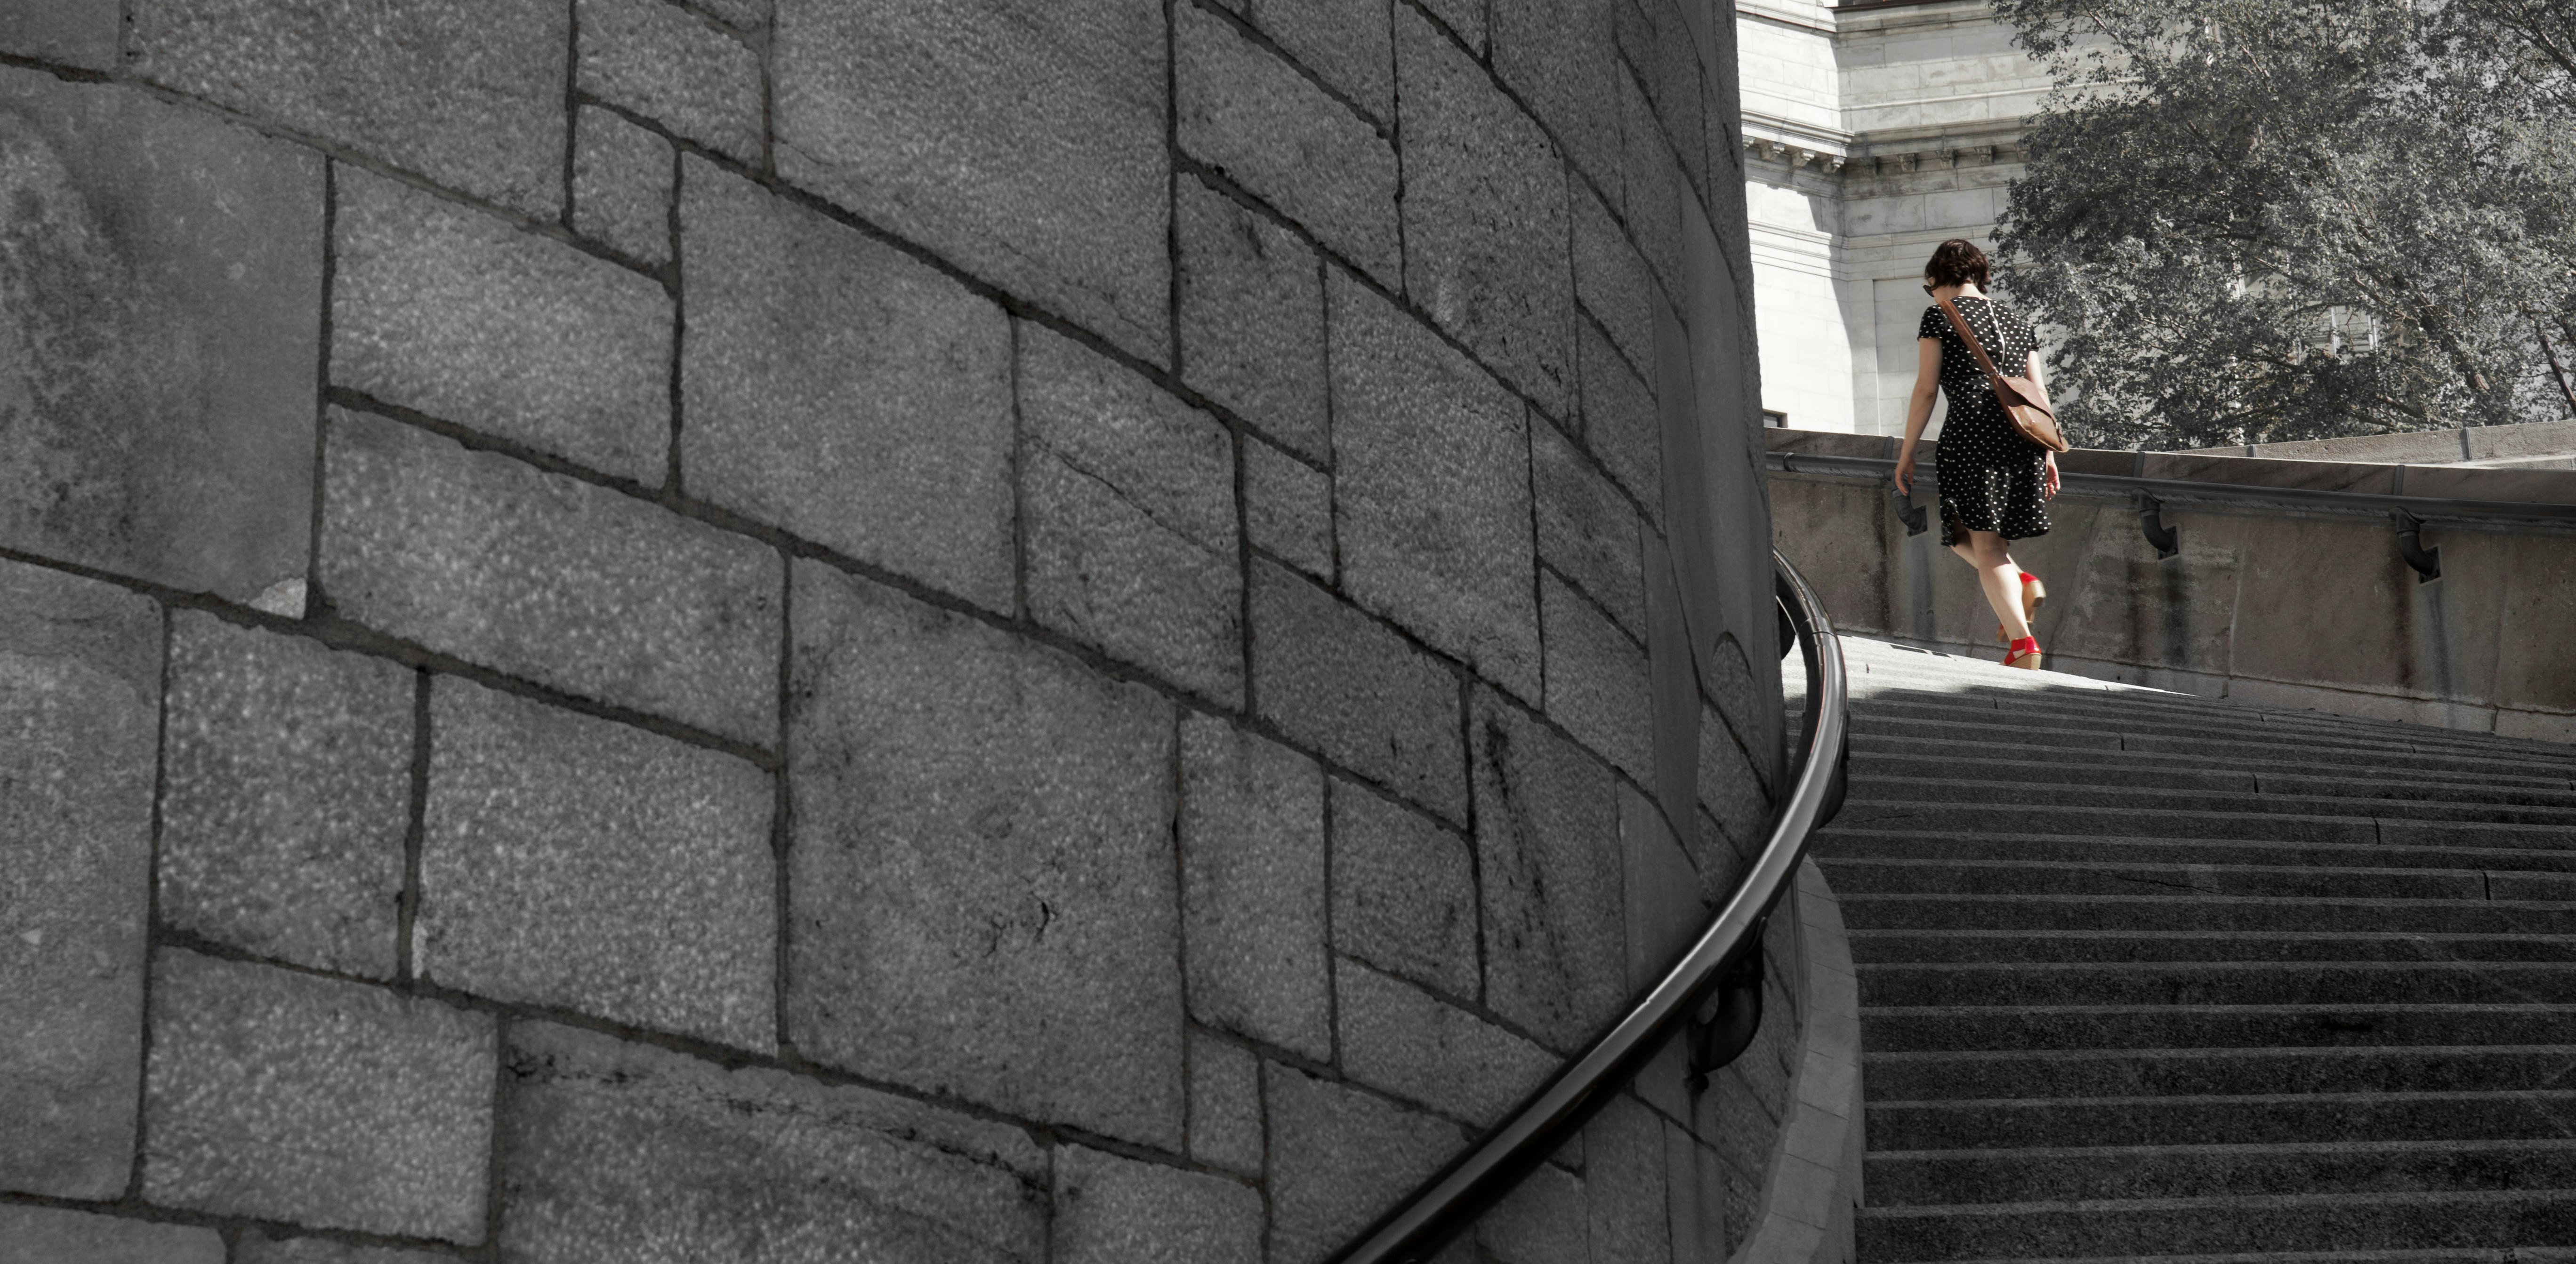 Woman with red shoes walking up circular stairs